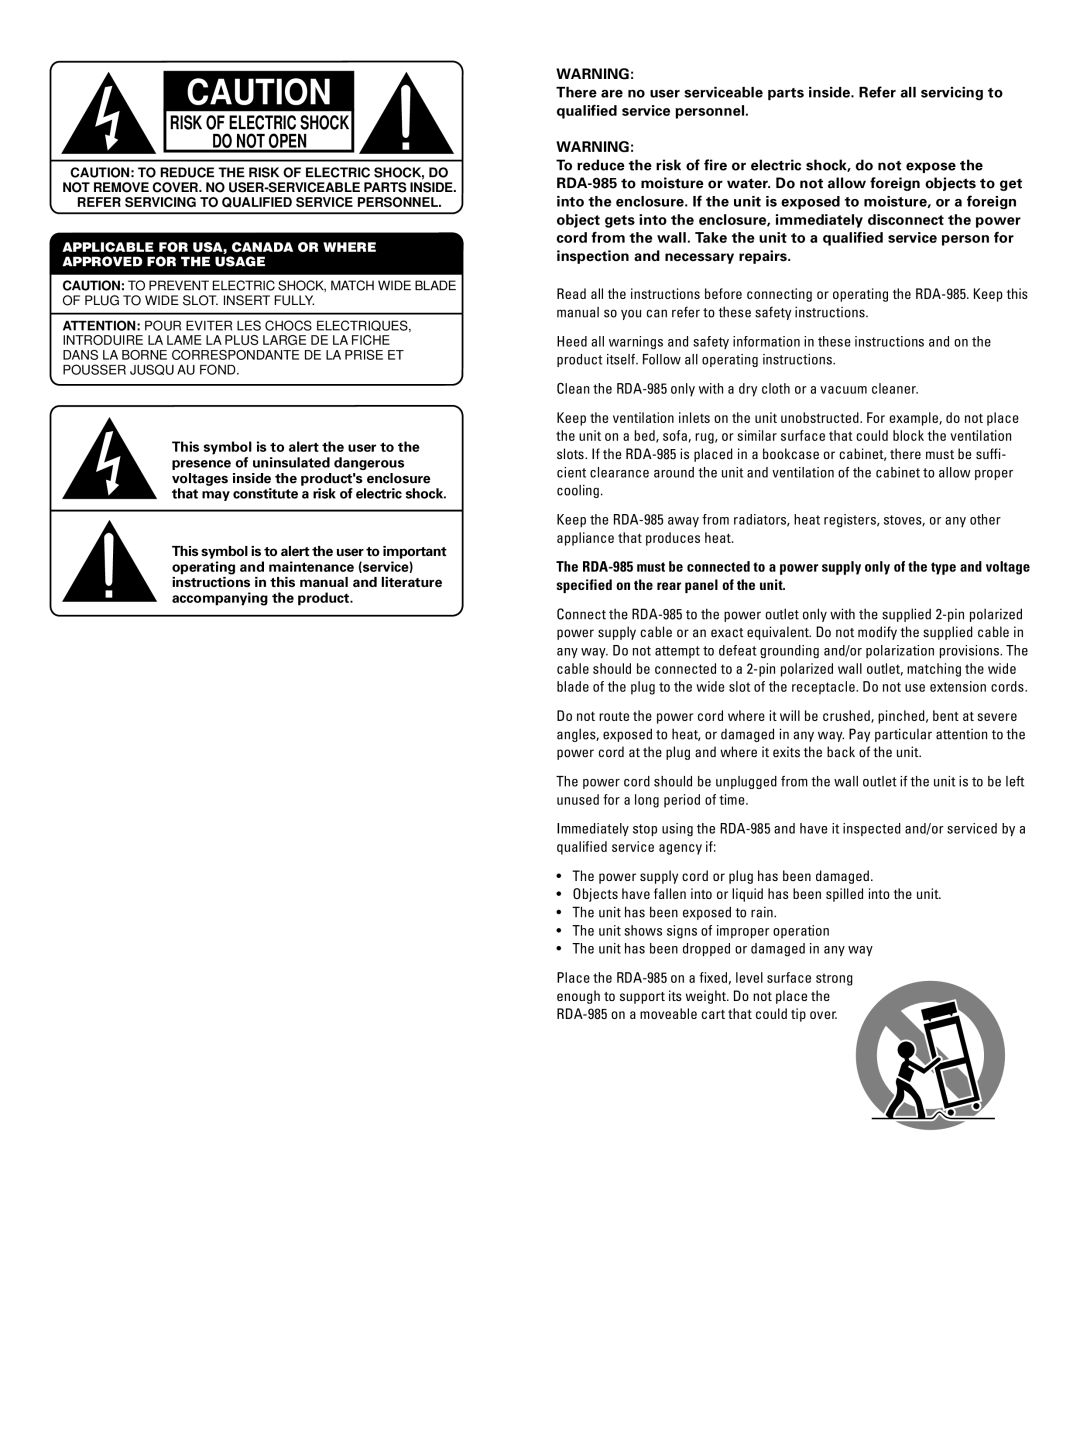 Rotel owner manual Risk Of Electric Shock Do Not Open, DTS DECODER RDA-985 